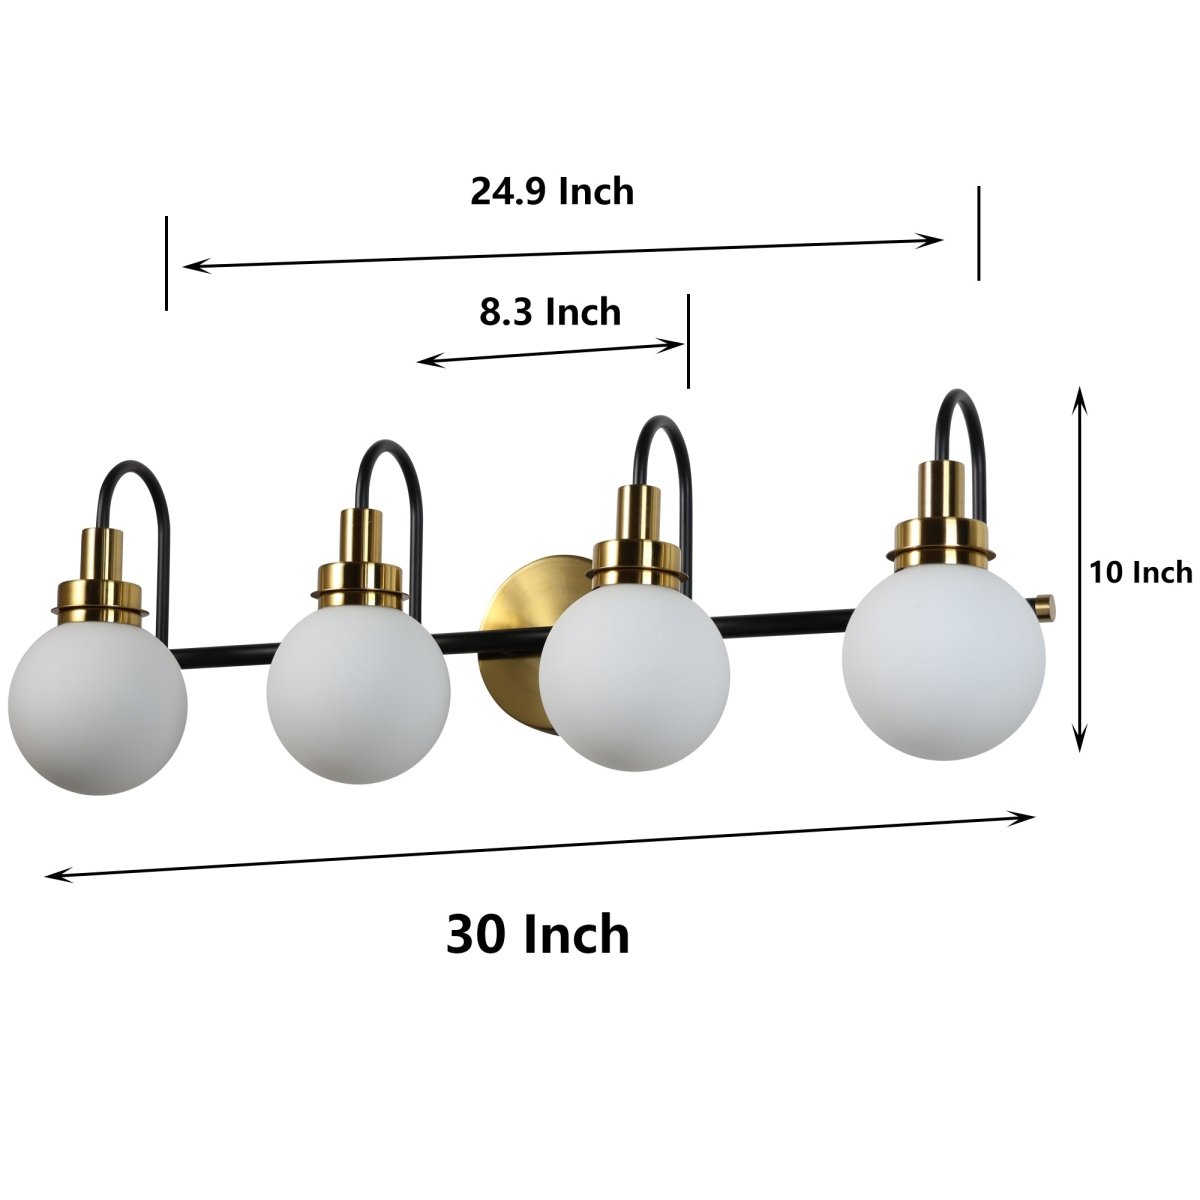 ExBrite Farmhouse Style 4-Light LED Vanity Light Fixture with Dimmable Switch